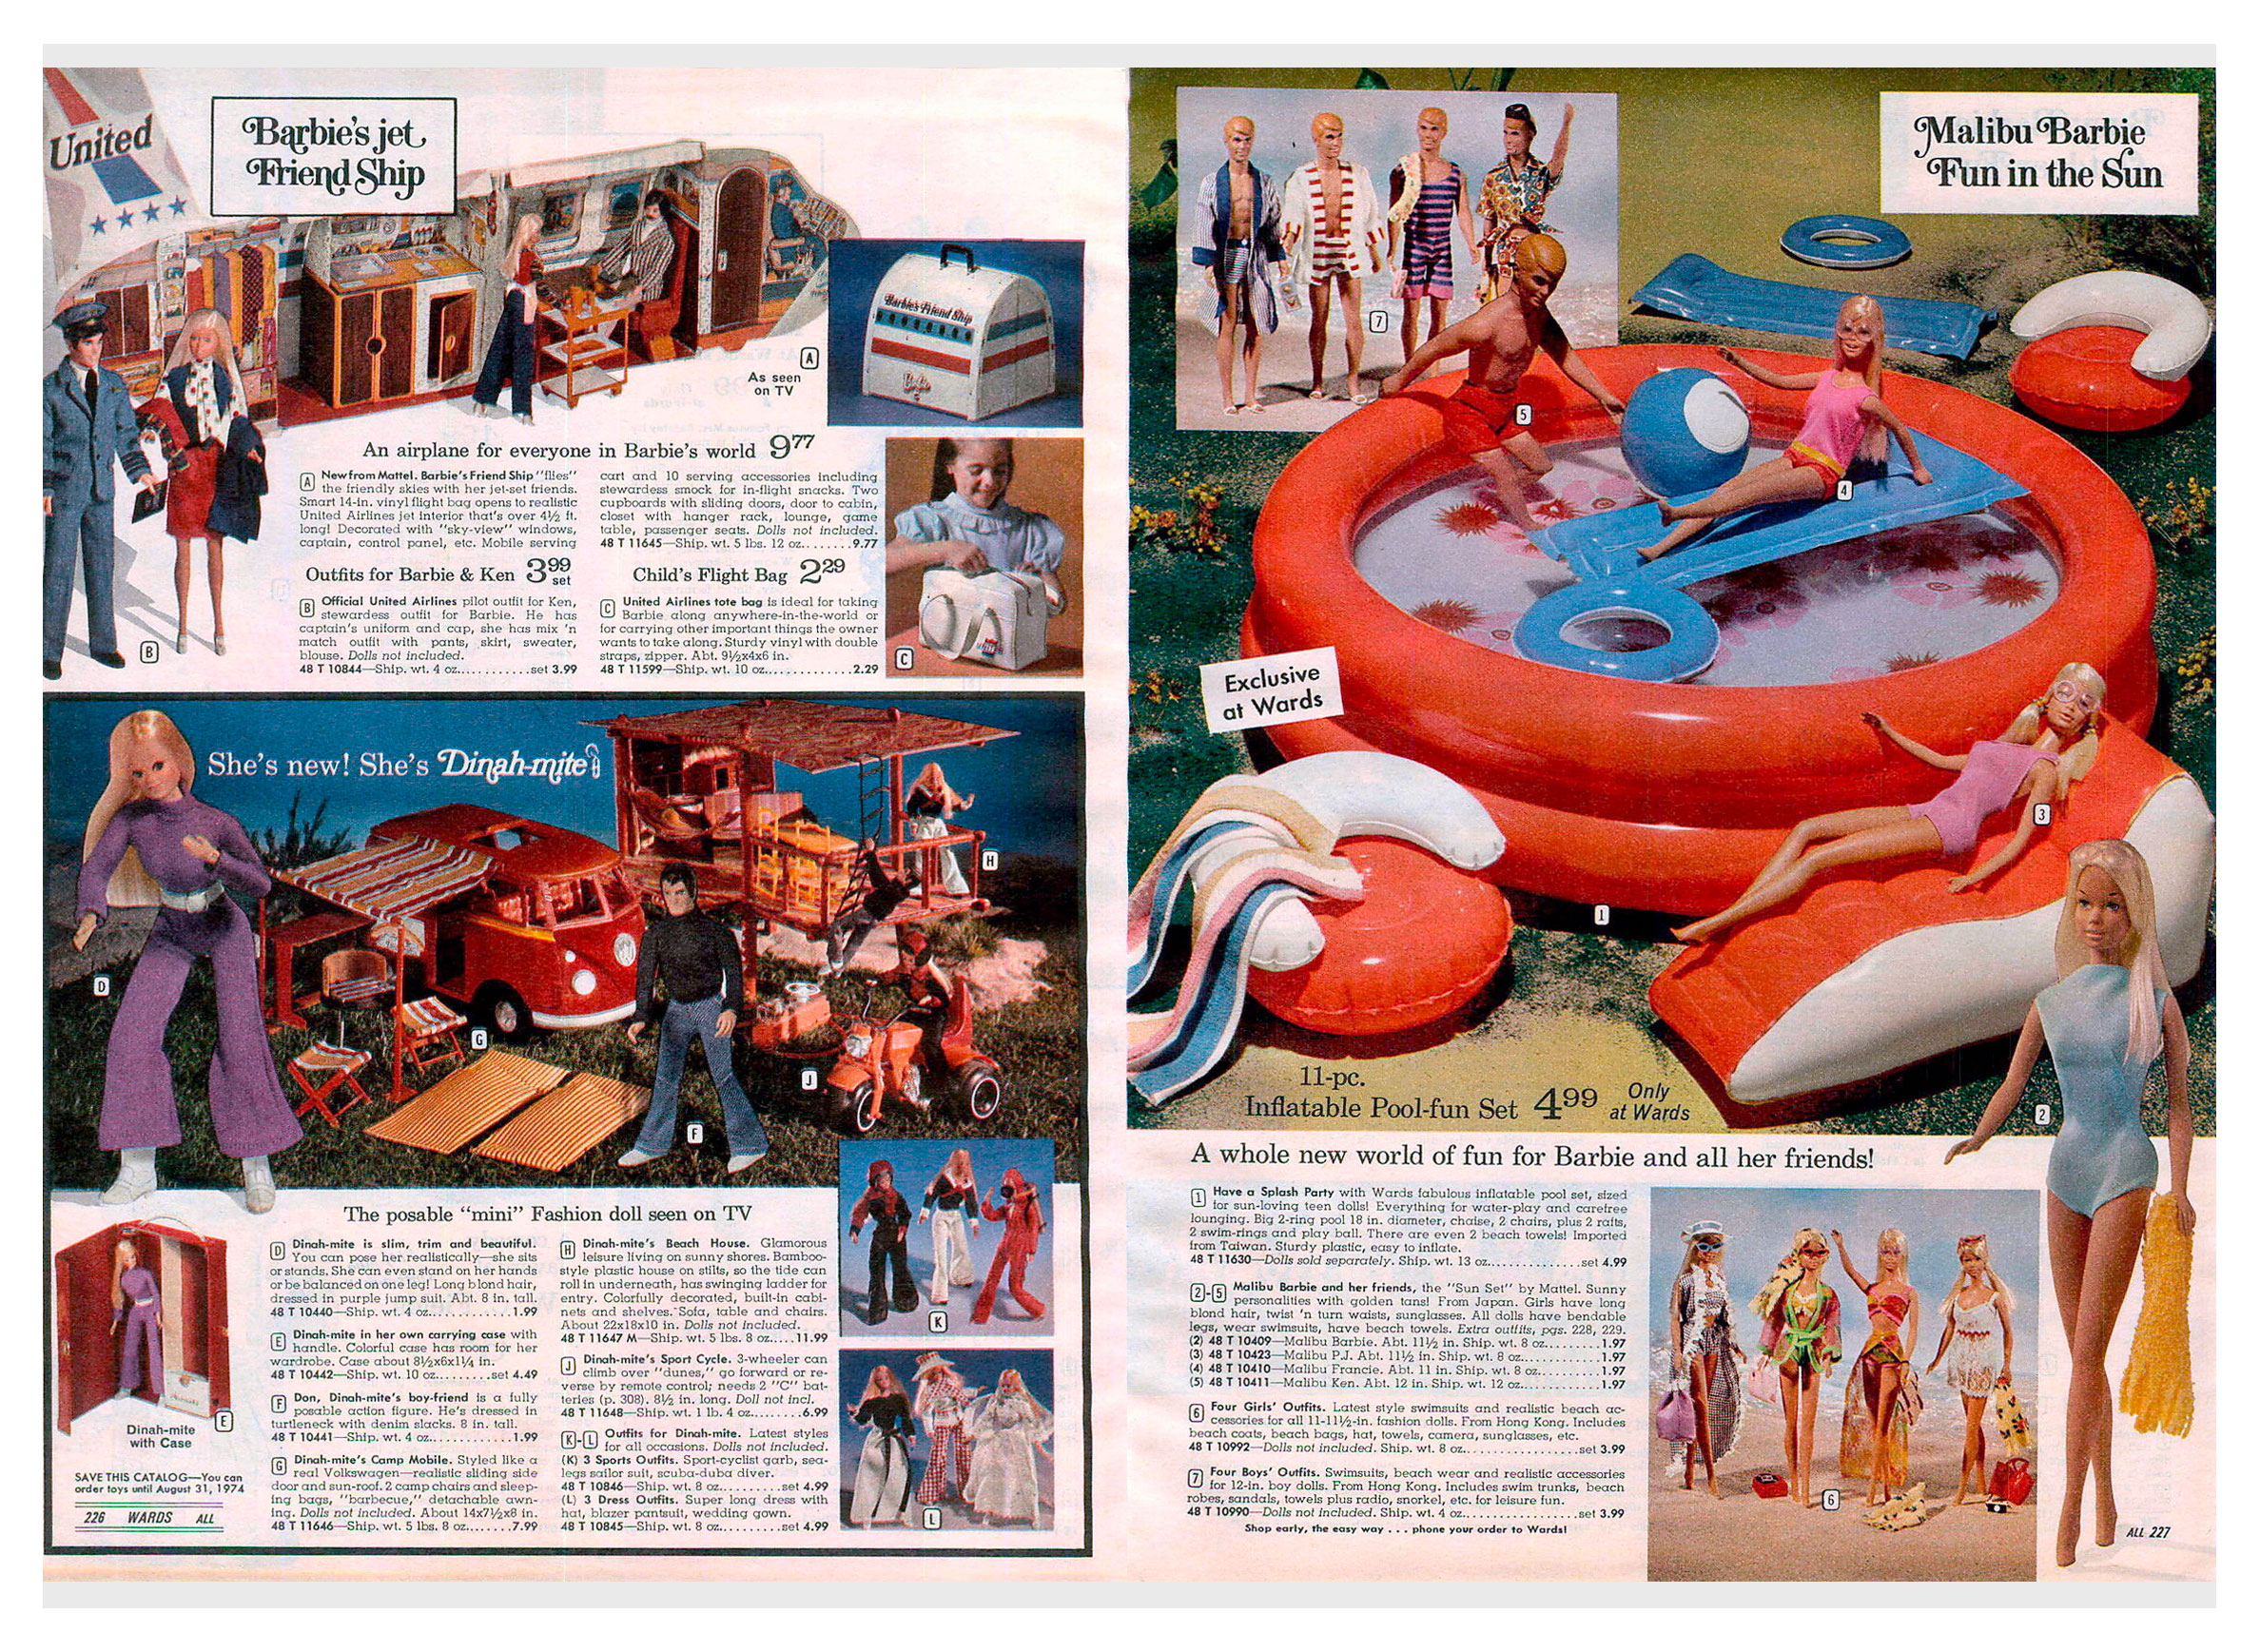 From 1973 Montgomery Ward Christmas catalogue